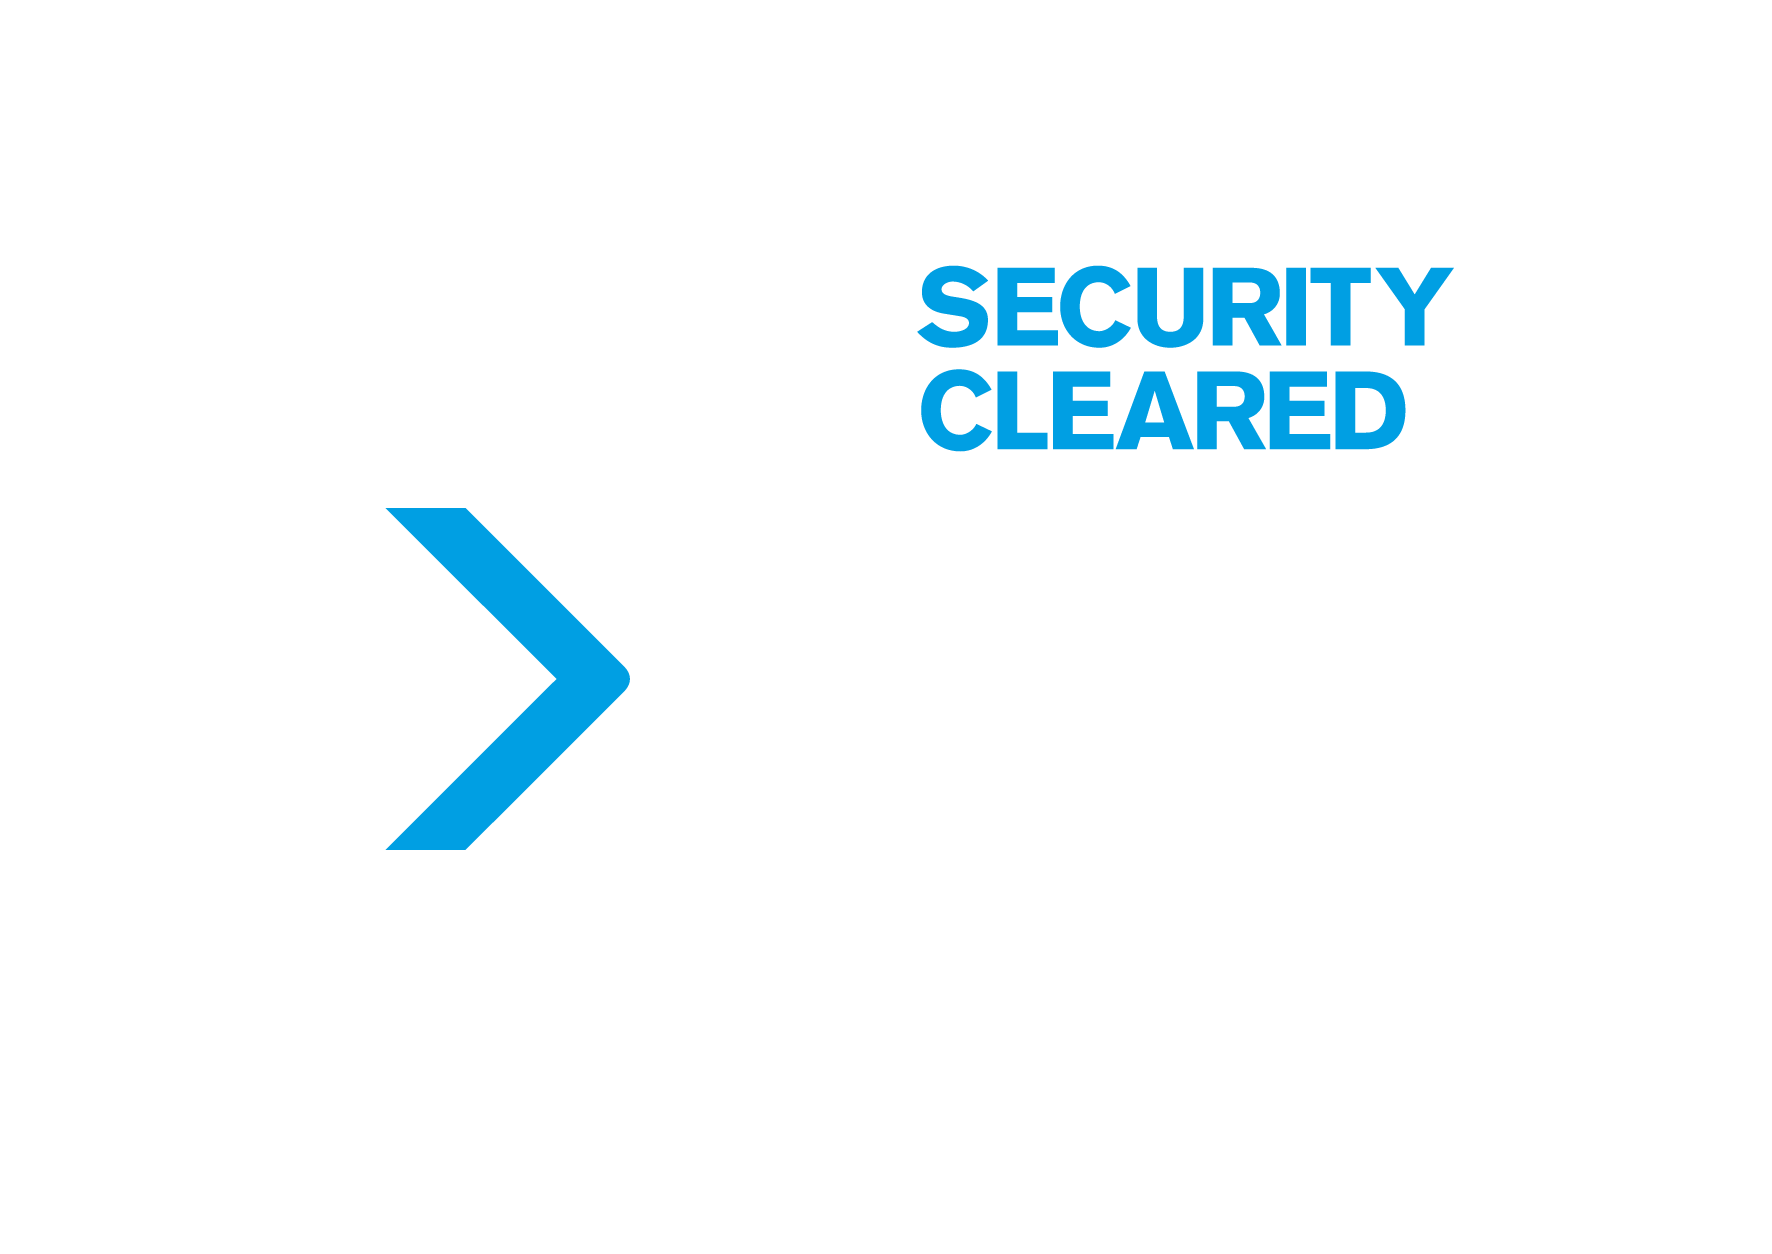 Security Cleared Expo border